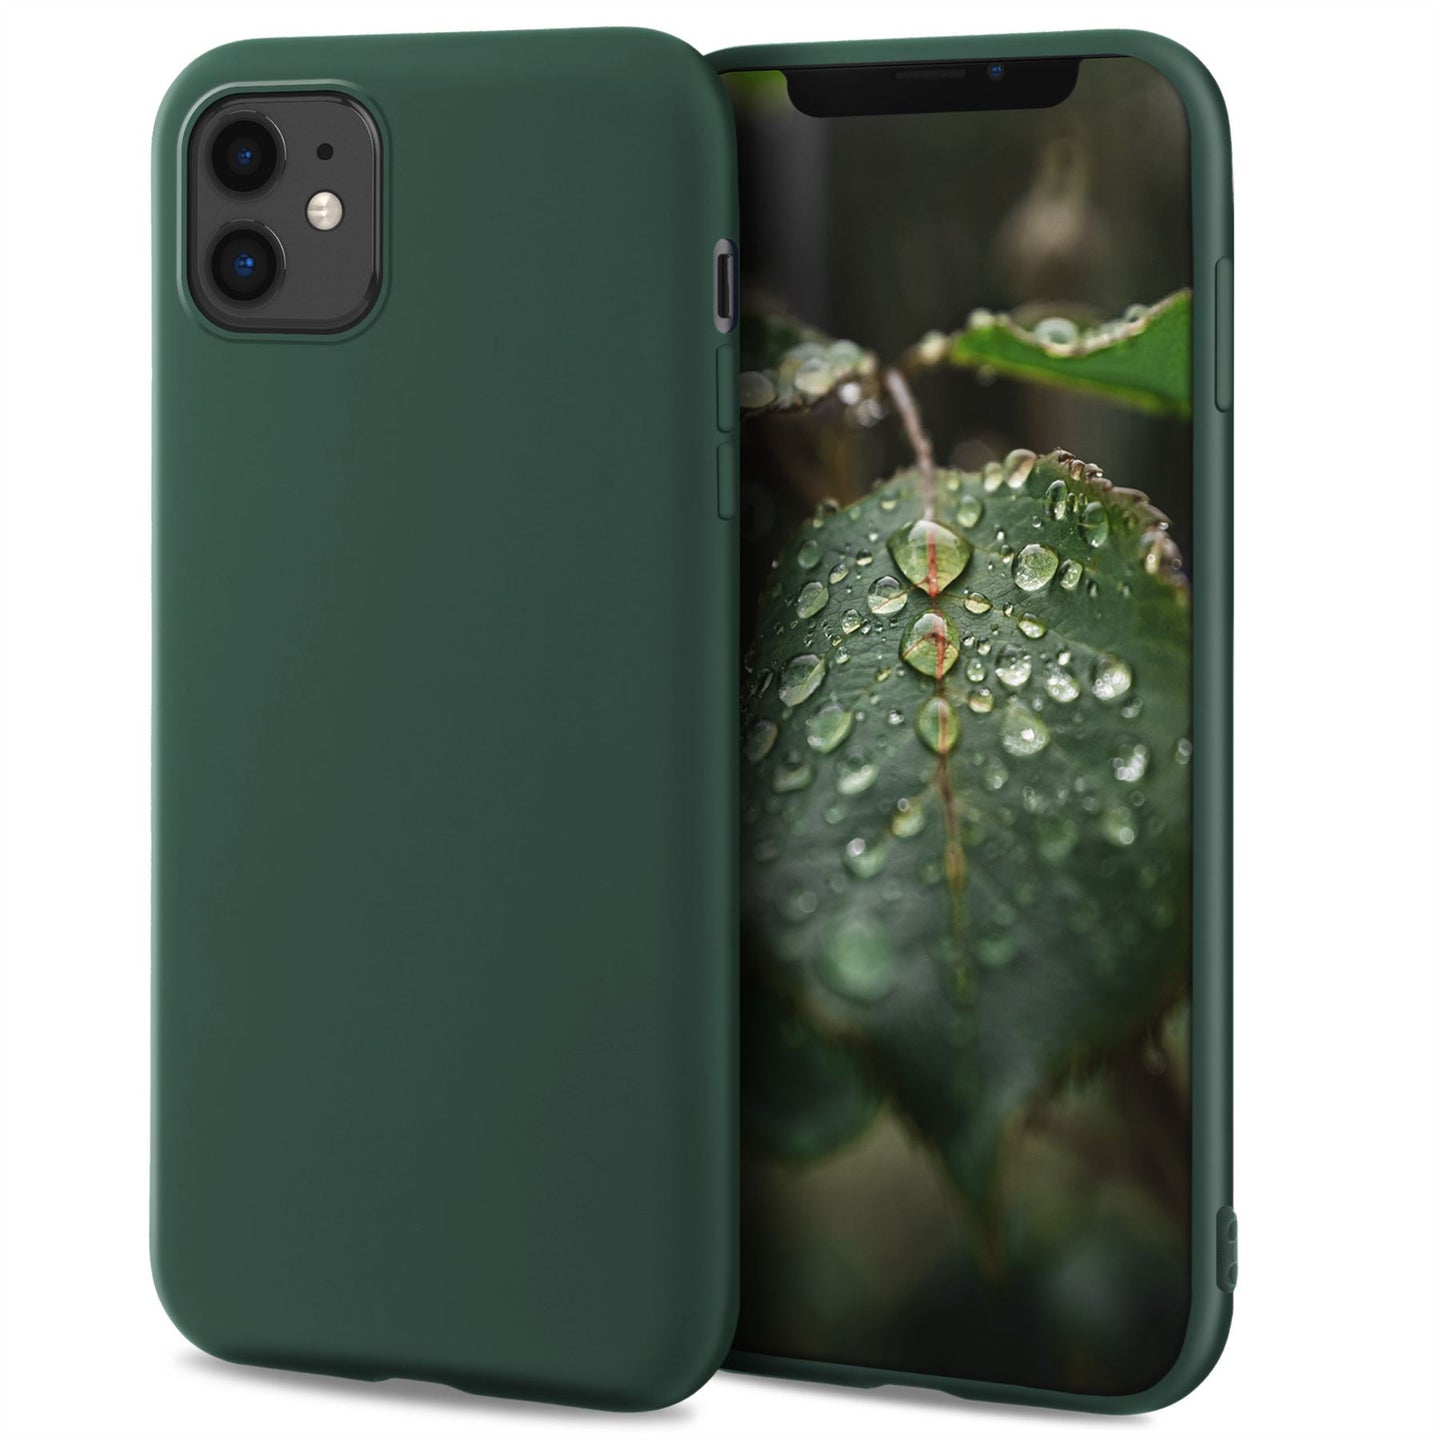 Moozy Lifestyle. Designed for iPhone 11 Case, Dark Green - Liquid Silicone Cover with Matte Finish and Soft Microfiber Lining